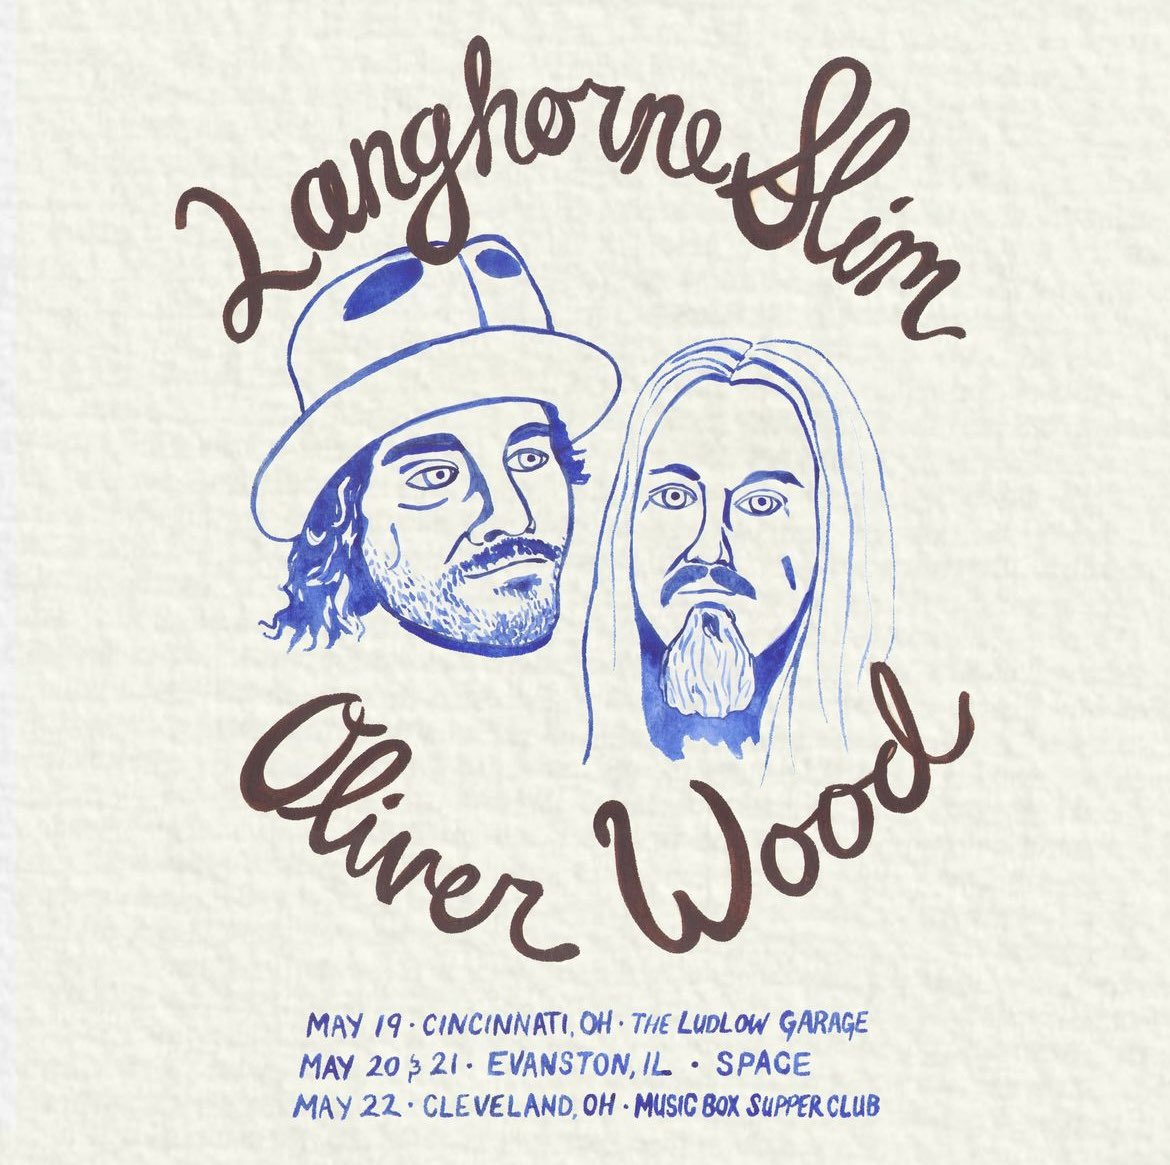 So excited to announce that I’ll be joining forces with my dear friend @LanghorneSlim for a co-headline tour this May! Early access to artist presale tickets starts tomorrow with code ‘LSOW24’ - general onsale Thursday 3/28! 💙💙💙 #langhorneslim #oliverwood #liveontour